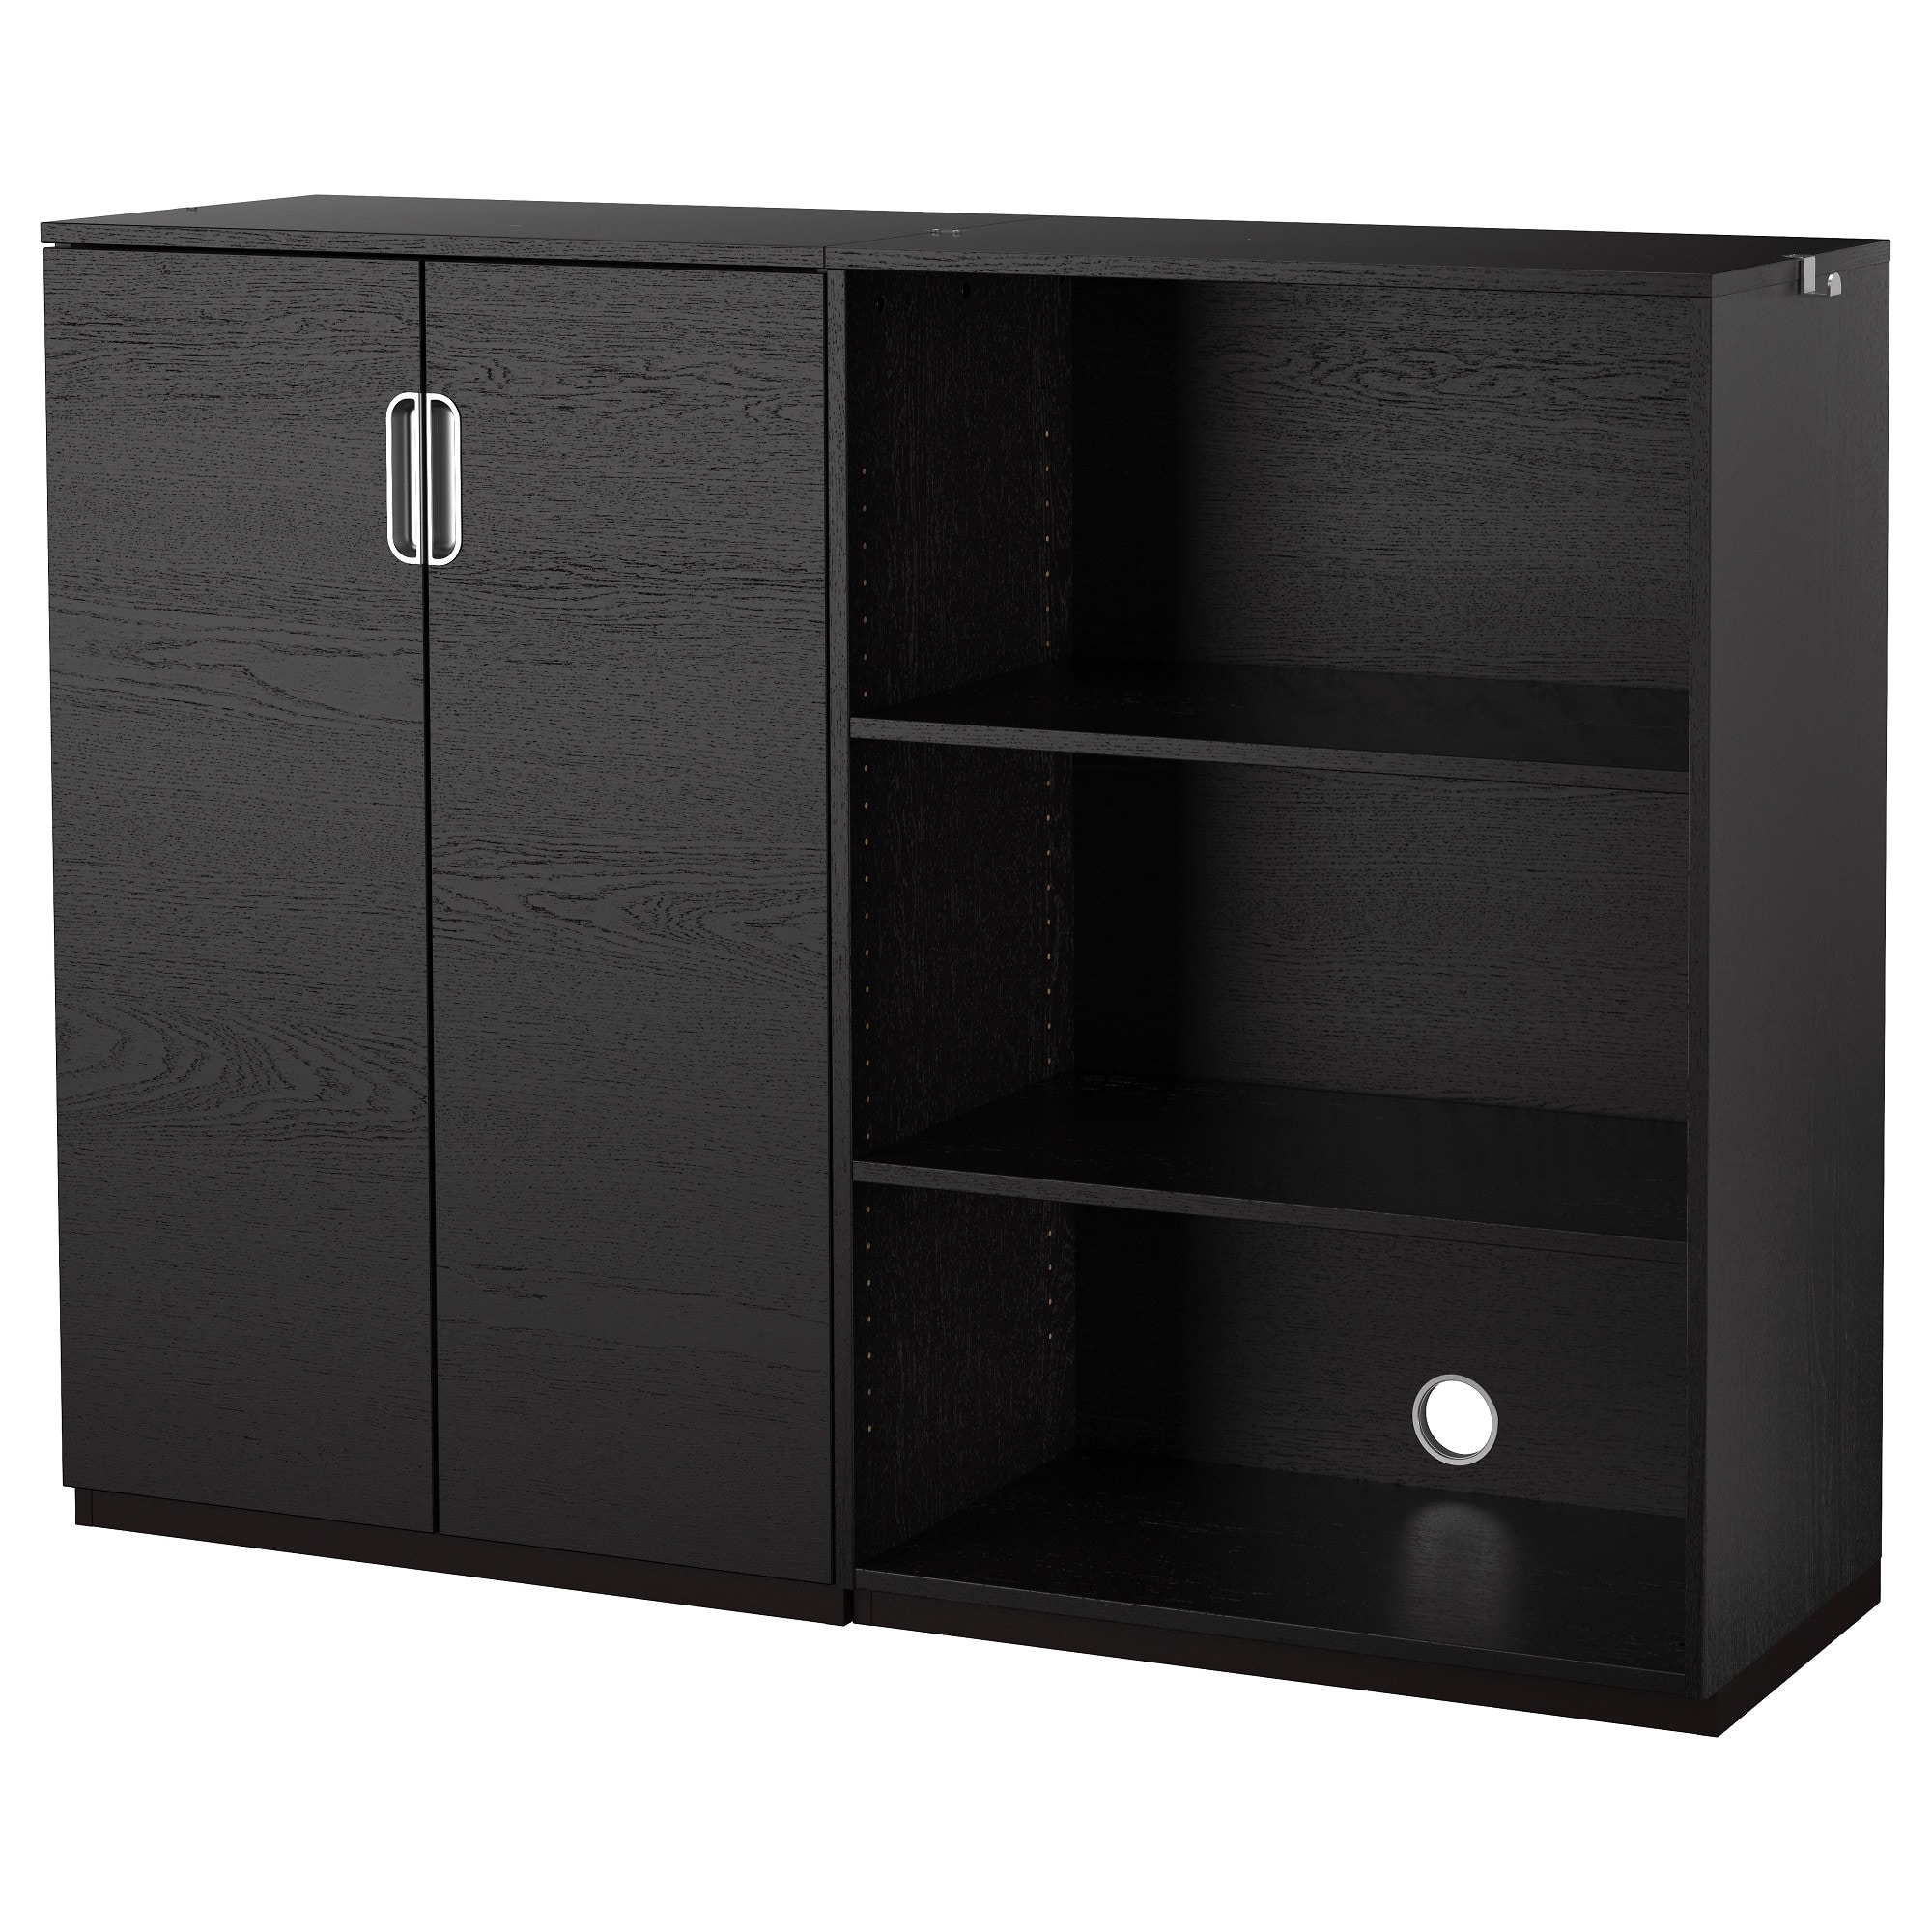 79184402 GALANT Low Cabinets IKEA khmer in phnom penh cambodia